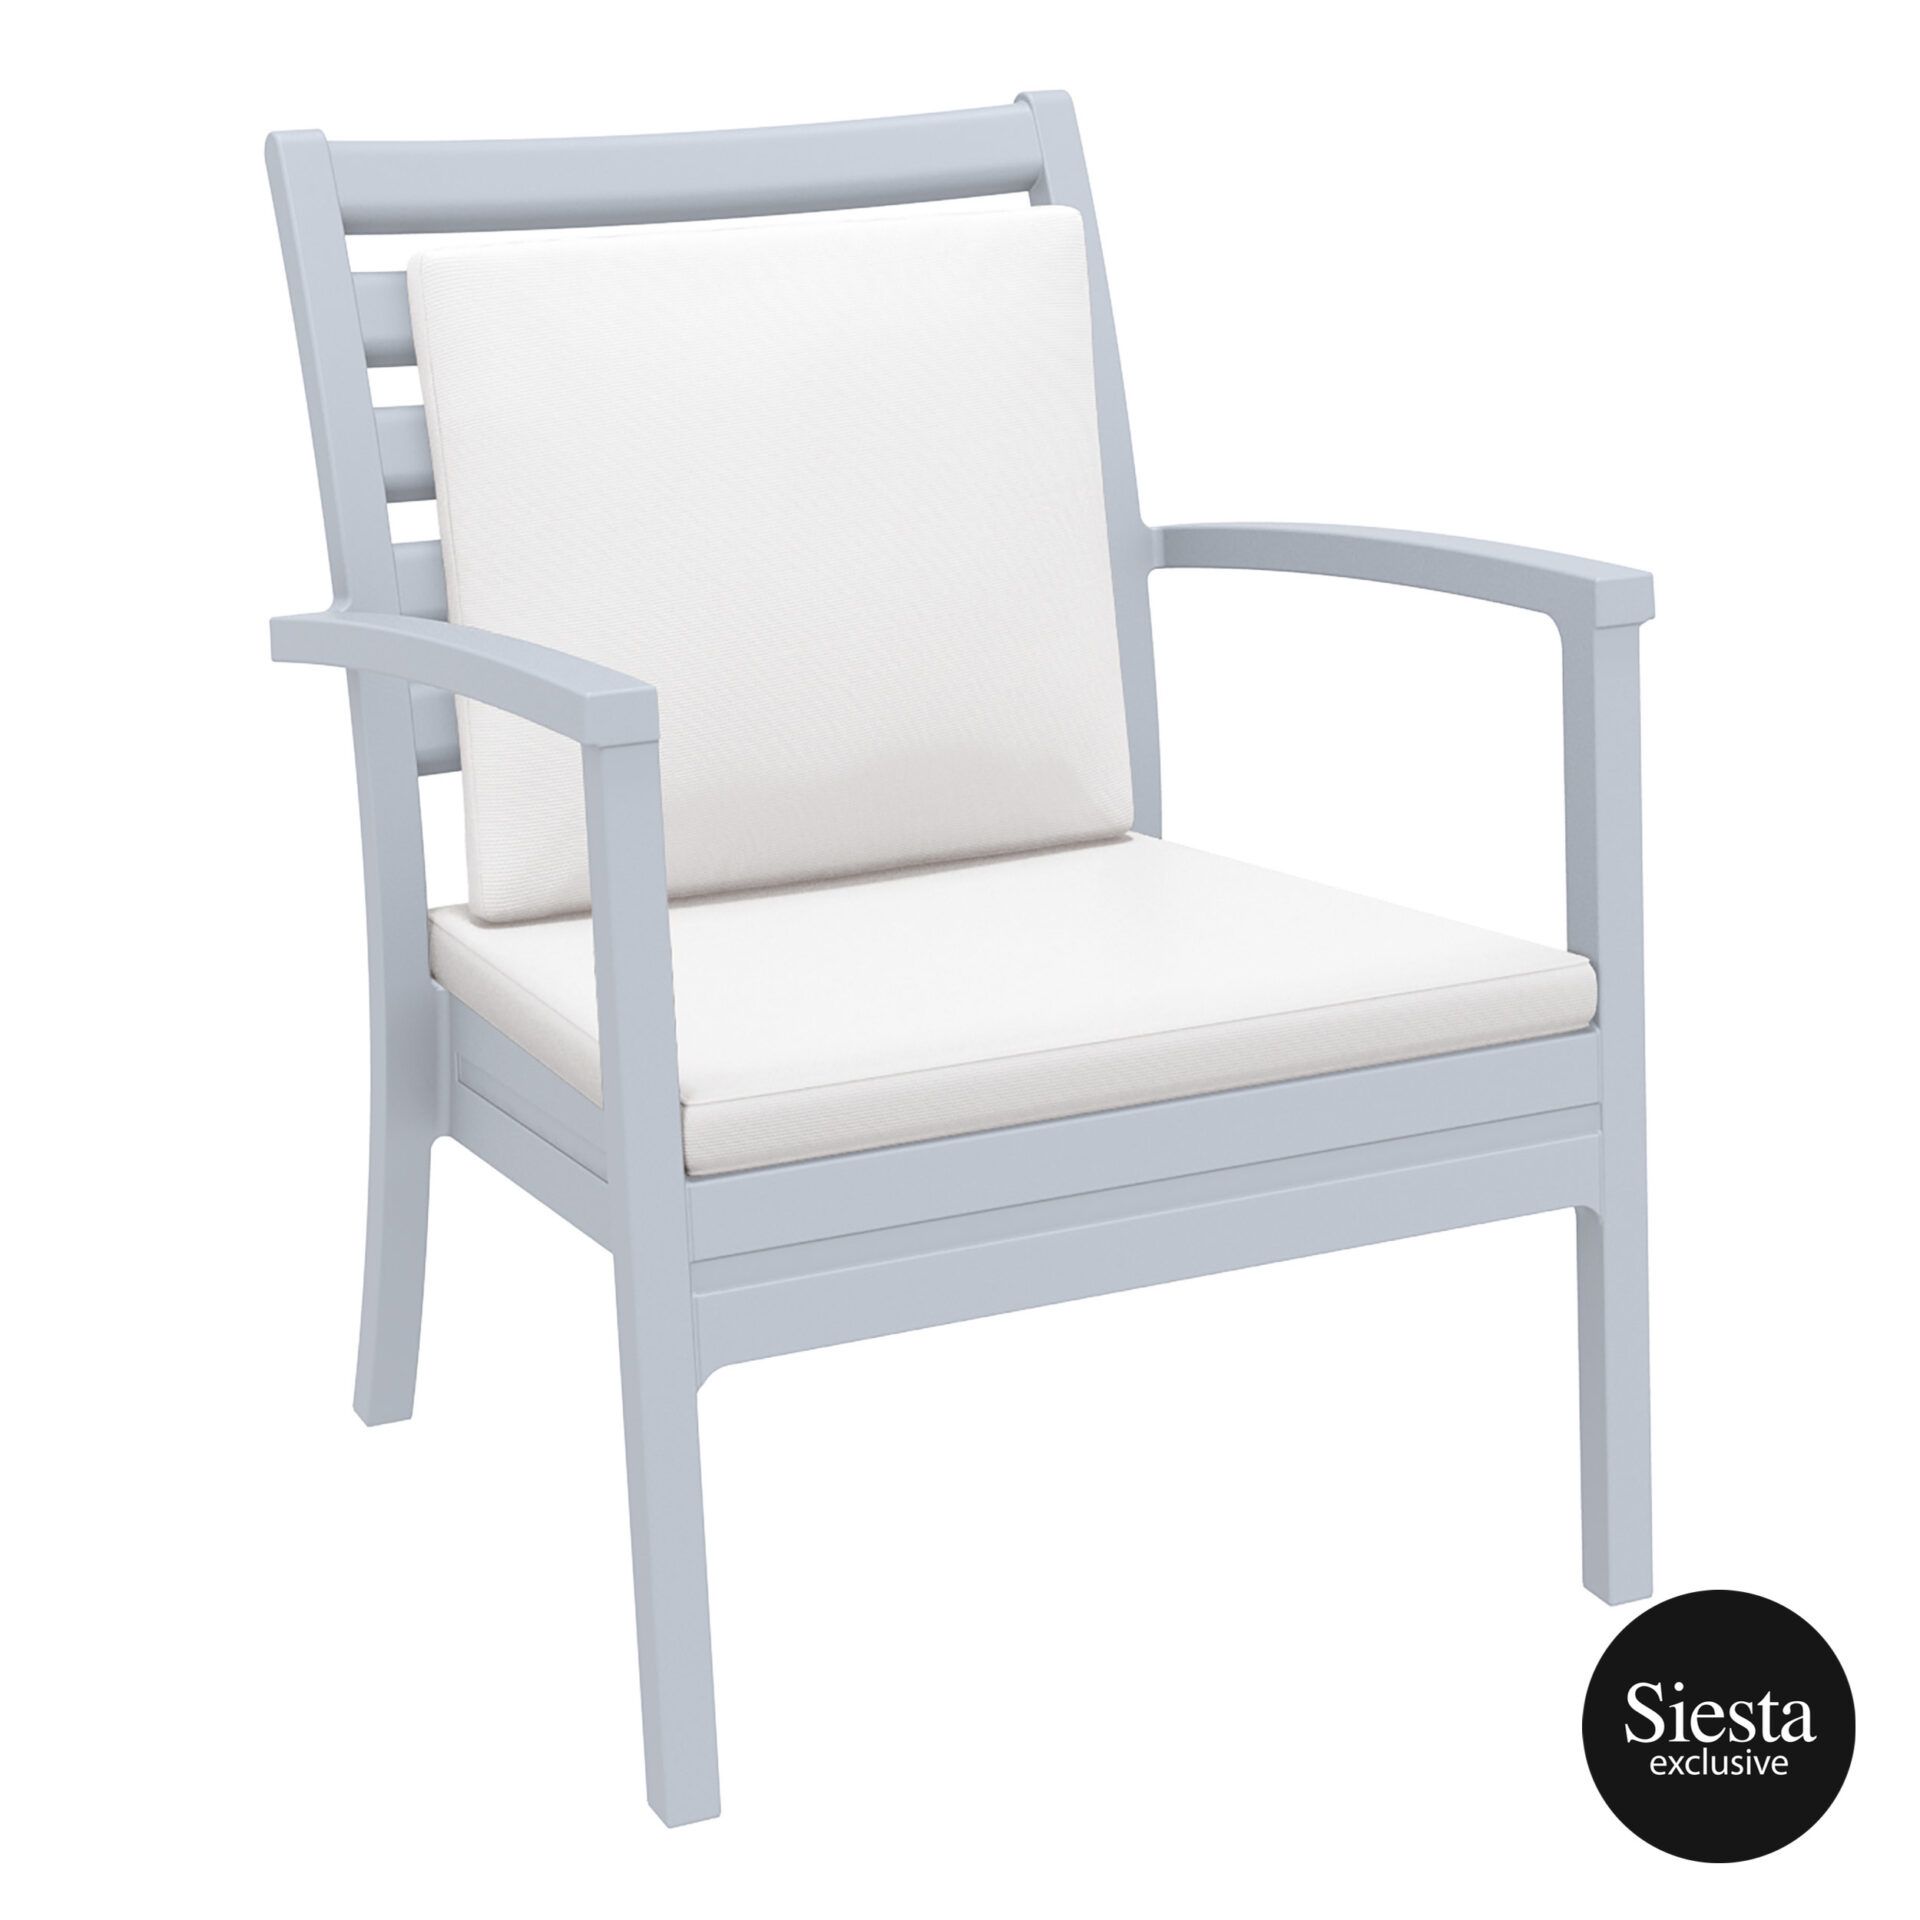 Artemis XL Armchair - Silver Grey with White Seat and Back Cushion